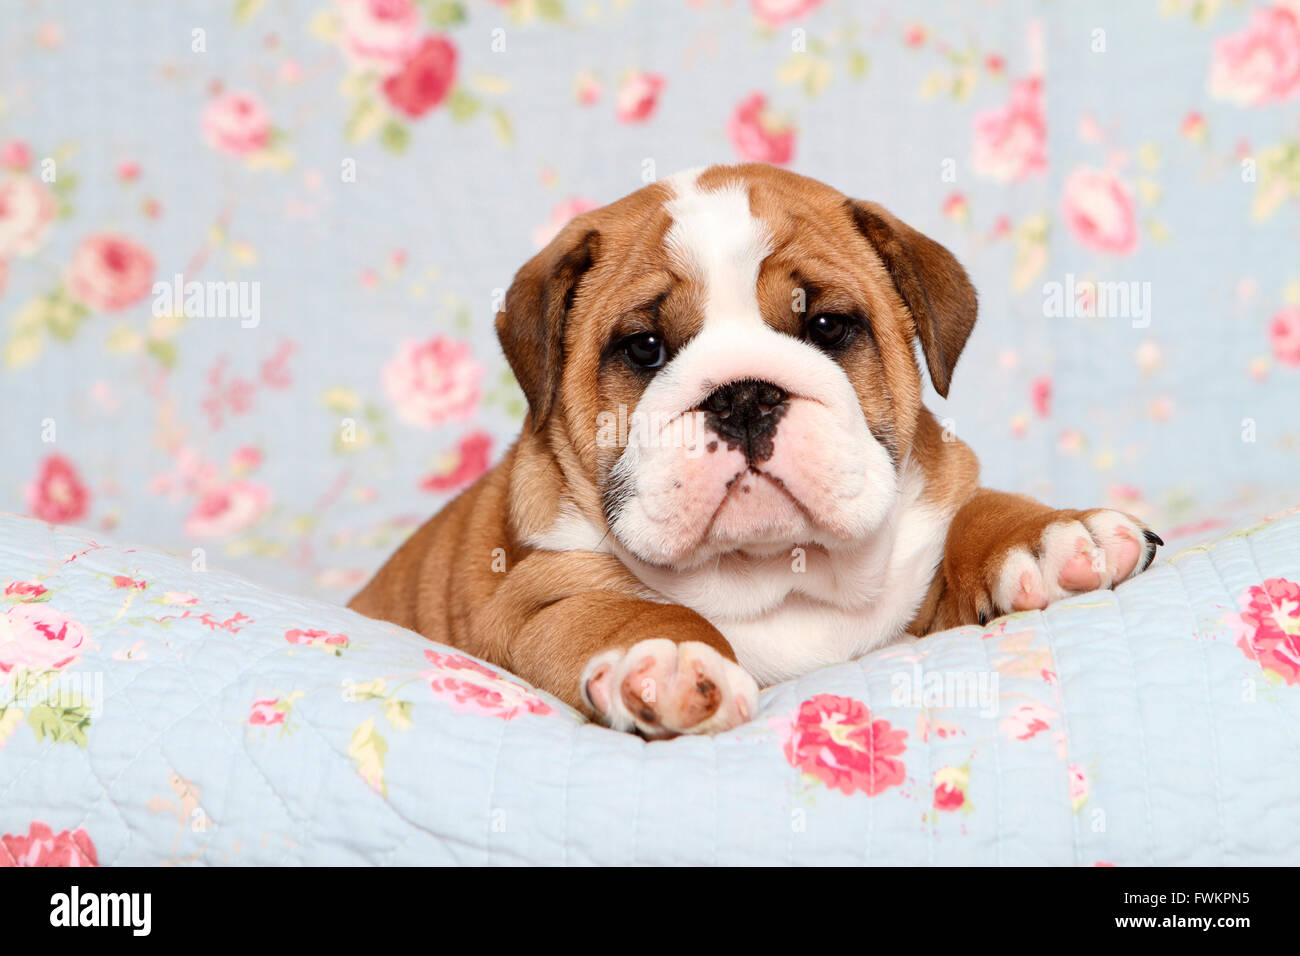 English Bulldog. Puppy (7 weeks old) lying on a blue blanket with rose flower print. Germany Stock Photo